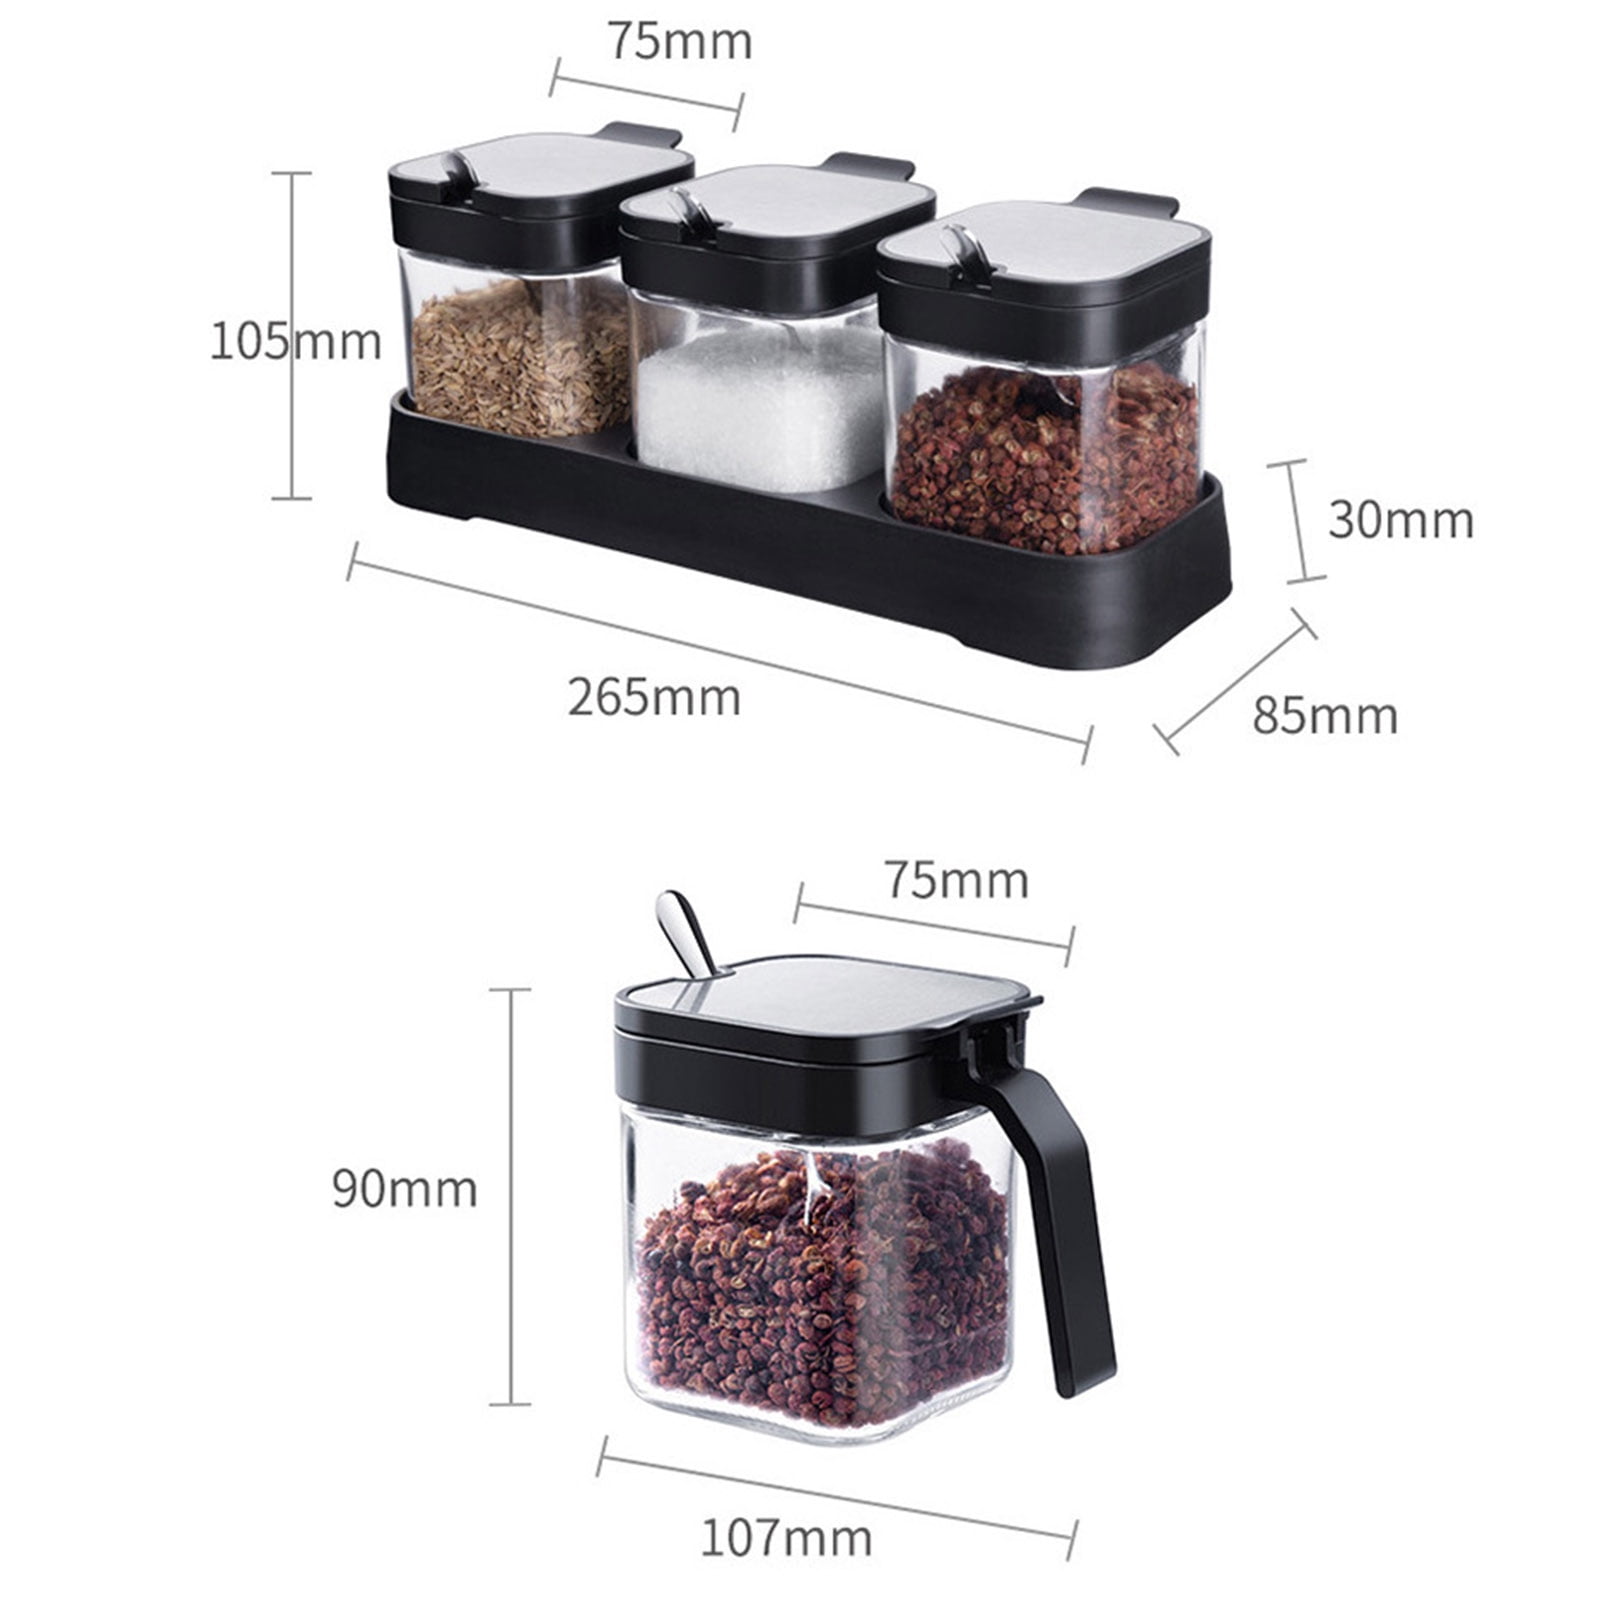 Glass Condiment Spice Jars,12oz/350 ml Condiment Jar Spice Container with  Lids and Spoons and Tray,Clear Glass Condiment Canisters,3Pack Seasoning  Box